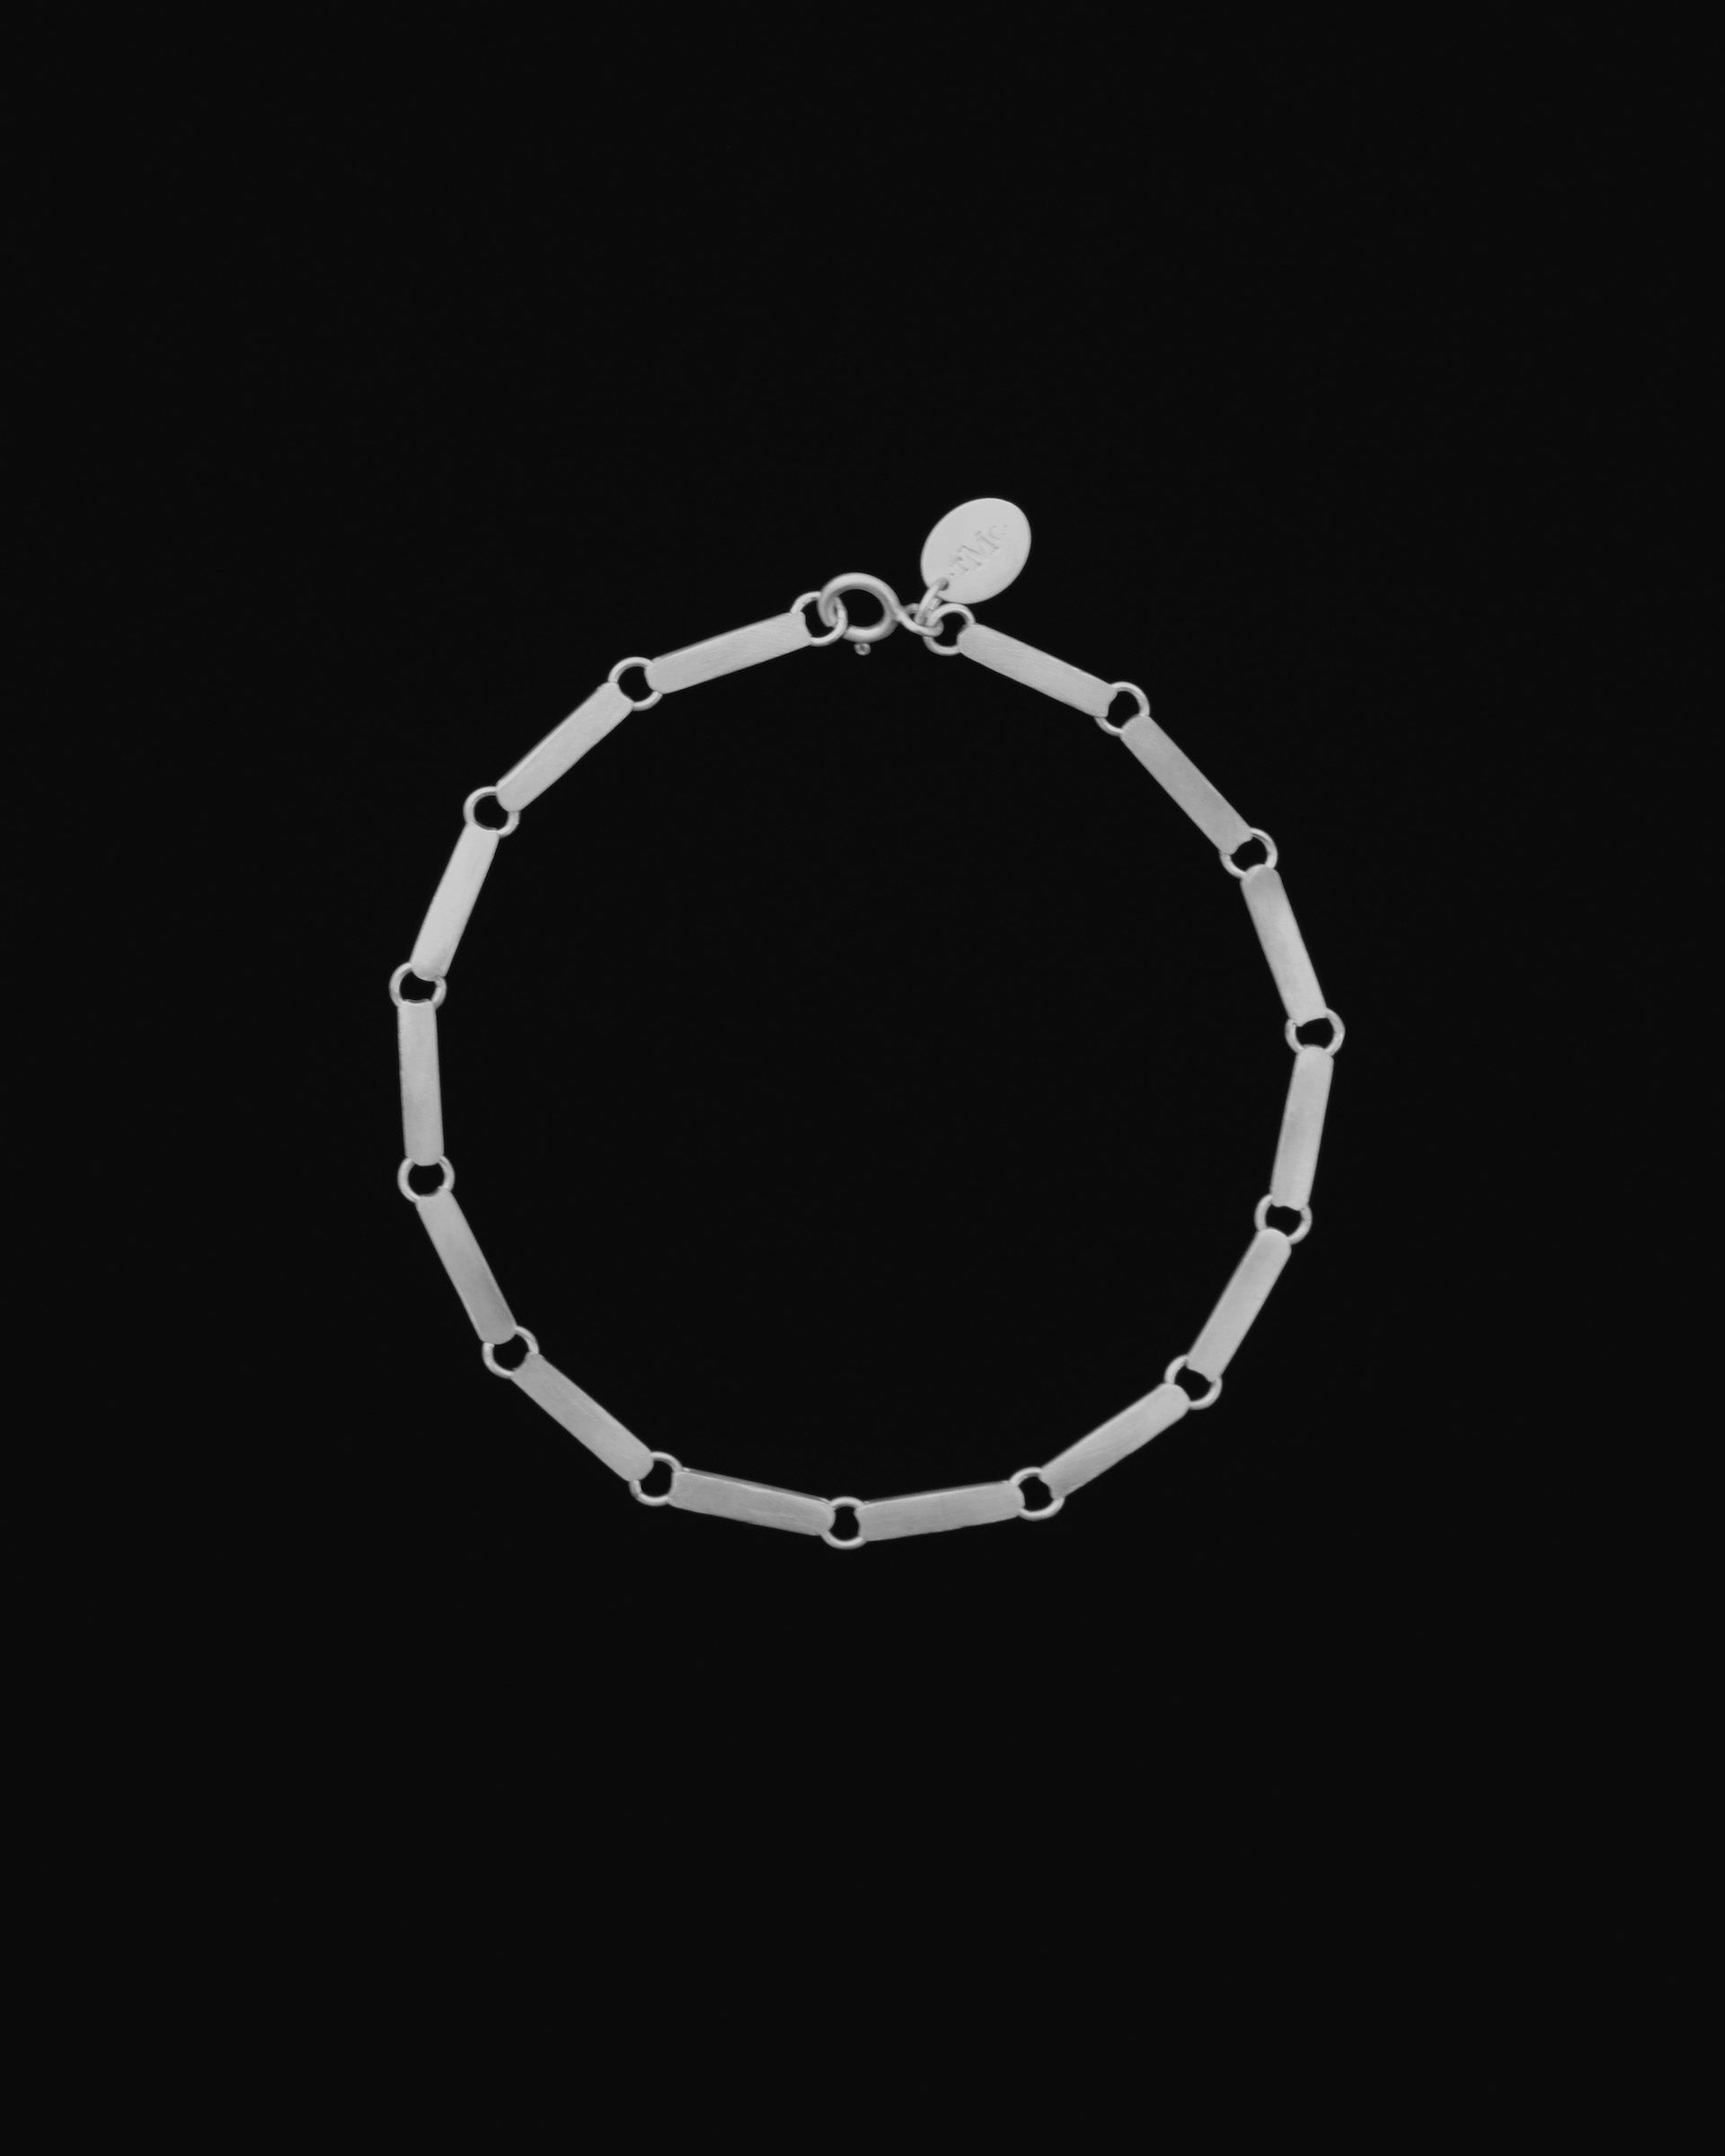 Tiana Marie Combes Estate Chain Bracelet in Sterling Silver.